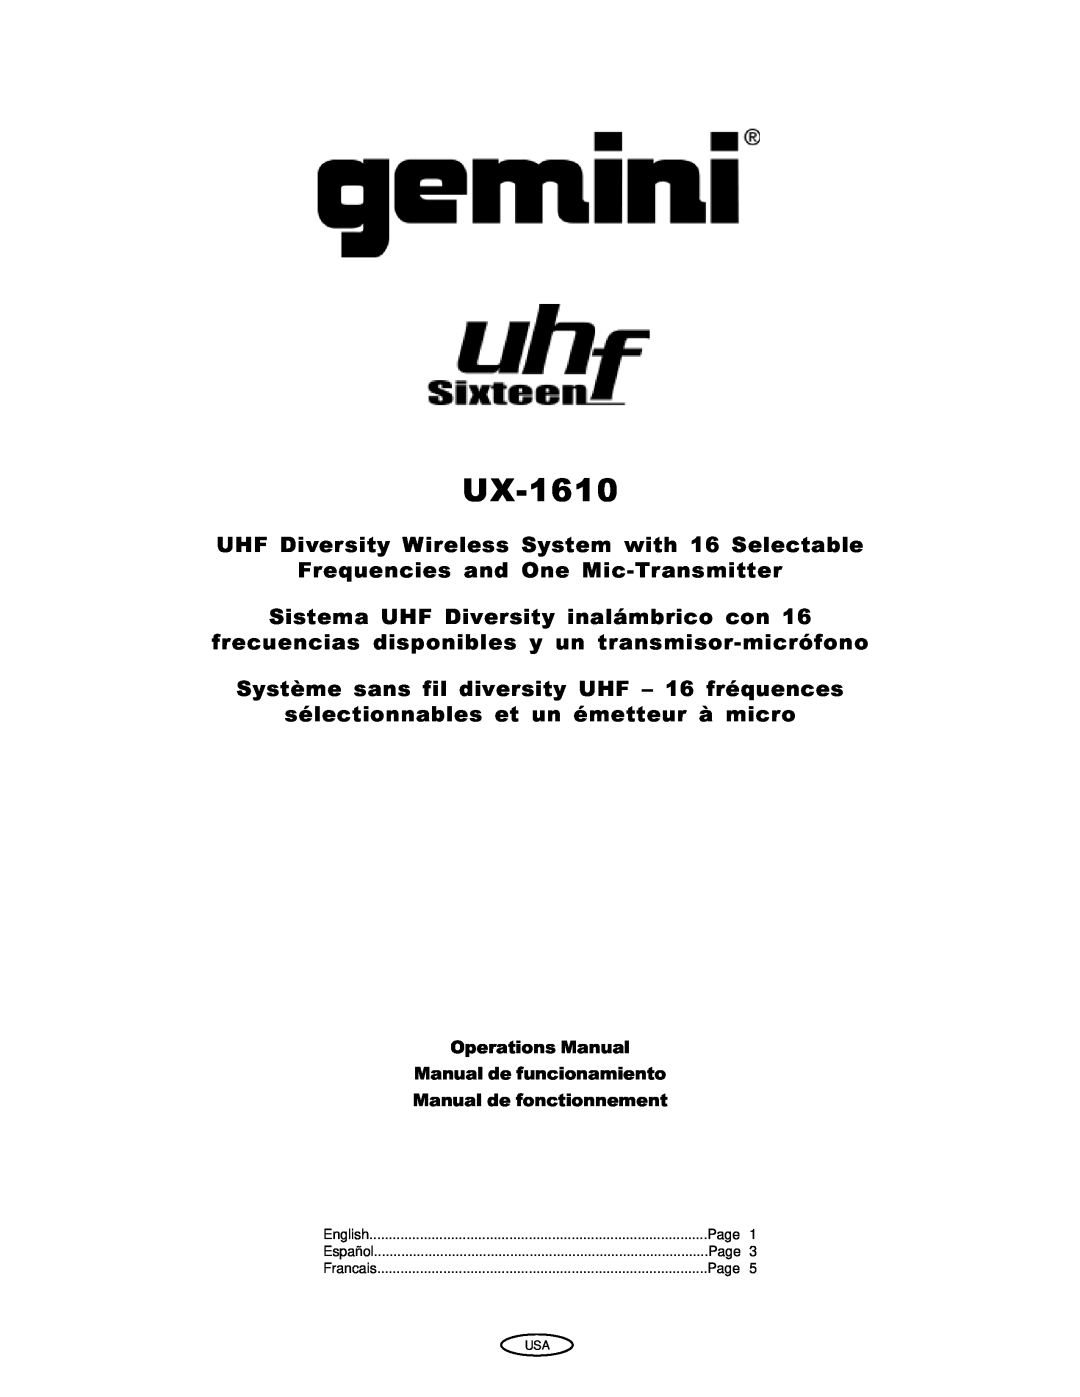 Gemini UX-1610 manual UHF Diversity Wireless System with 16 Selectable, Frequencies and One Mic-Transmitter, Francais 